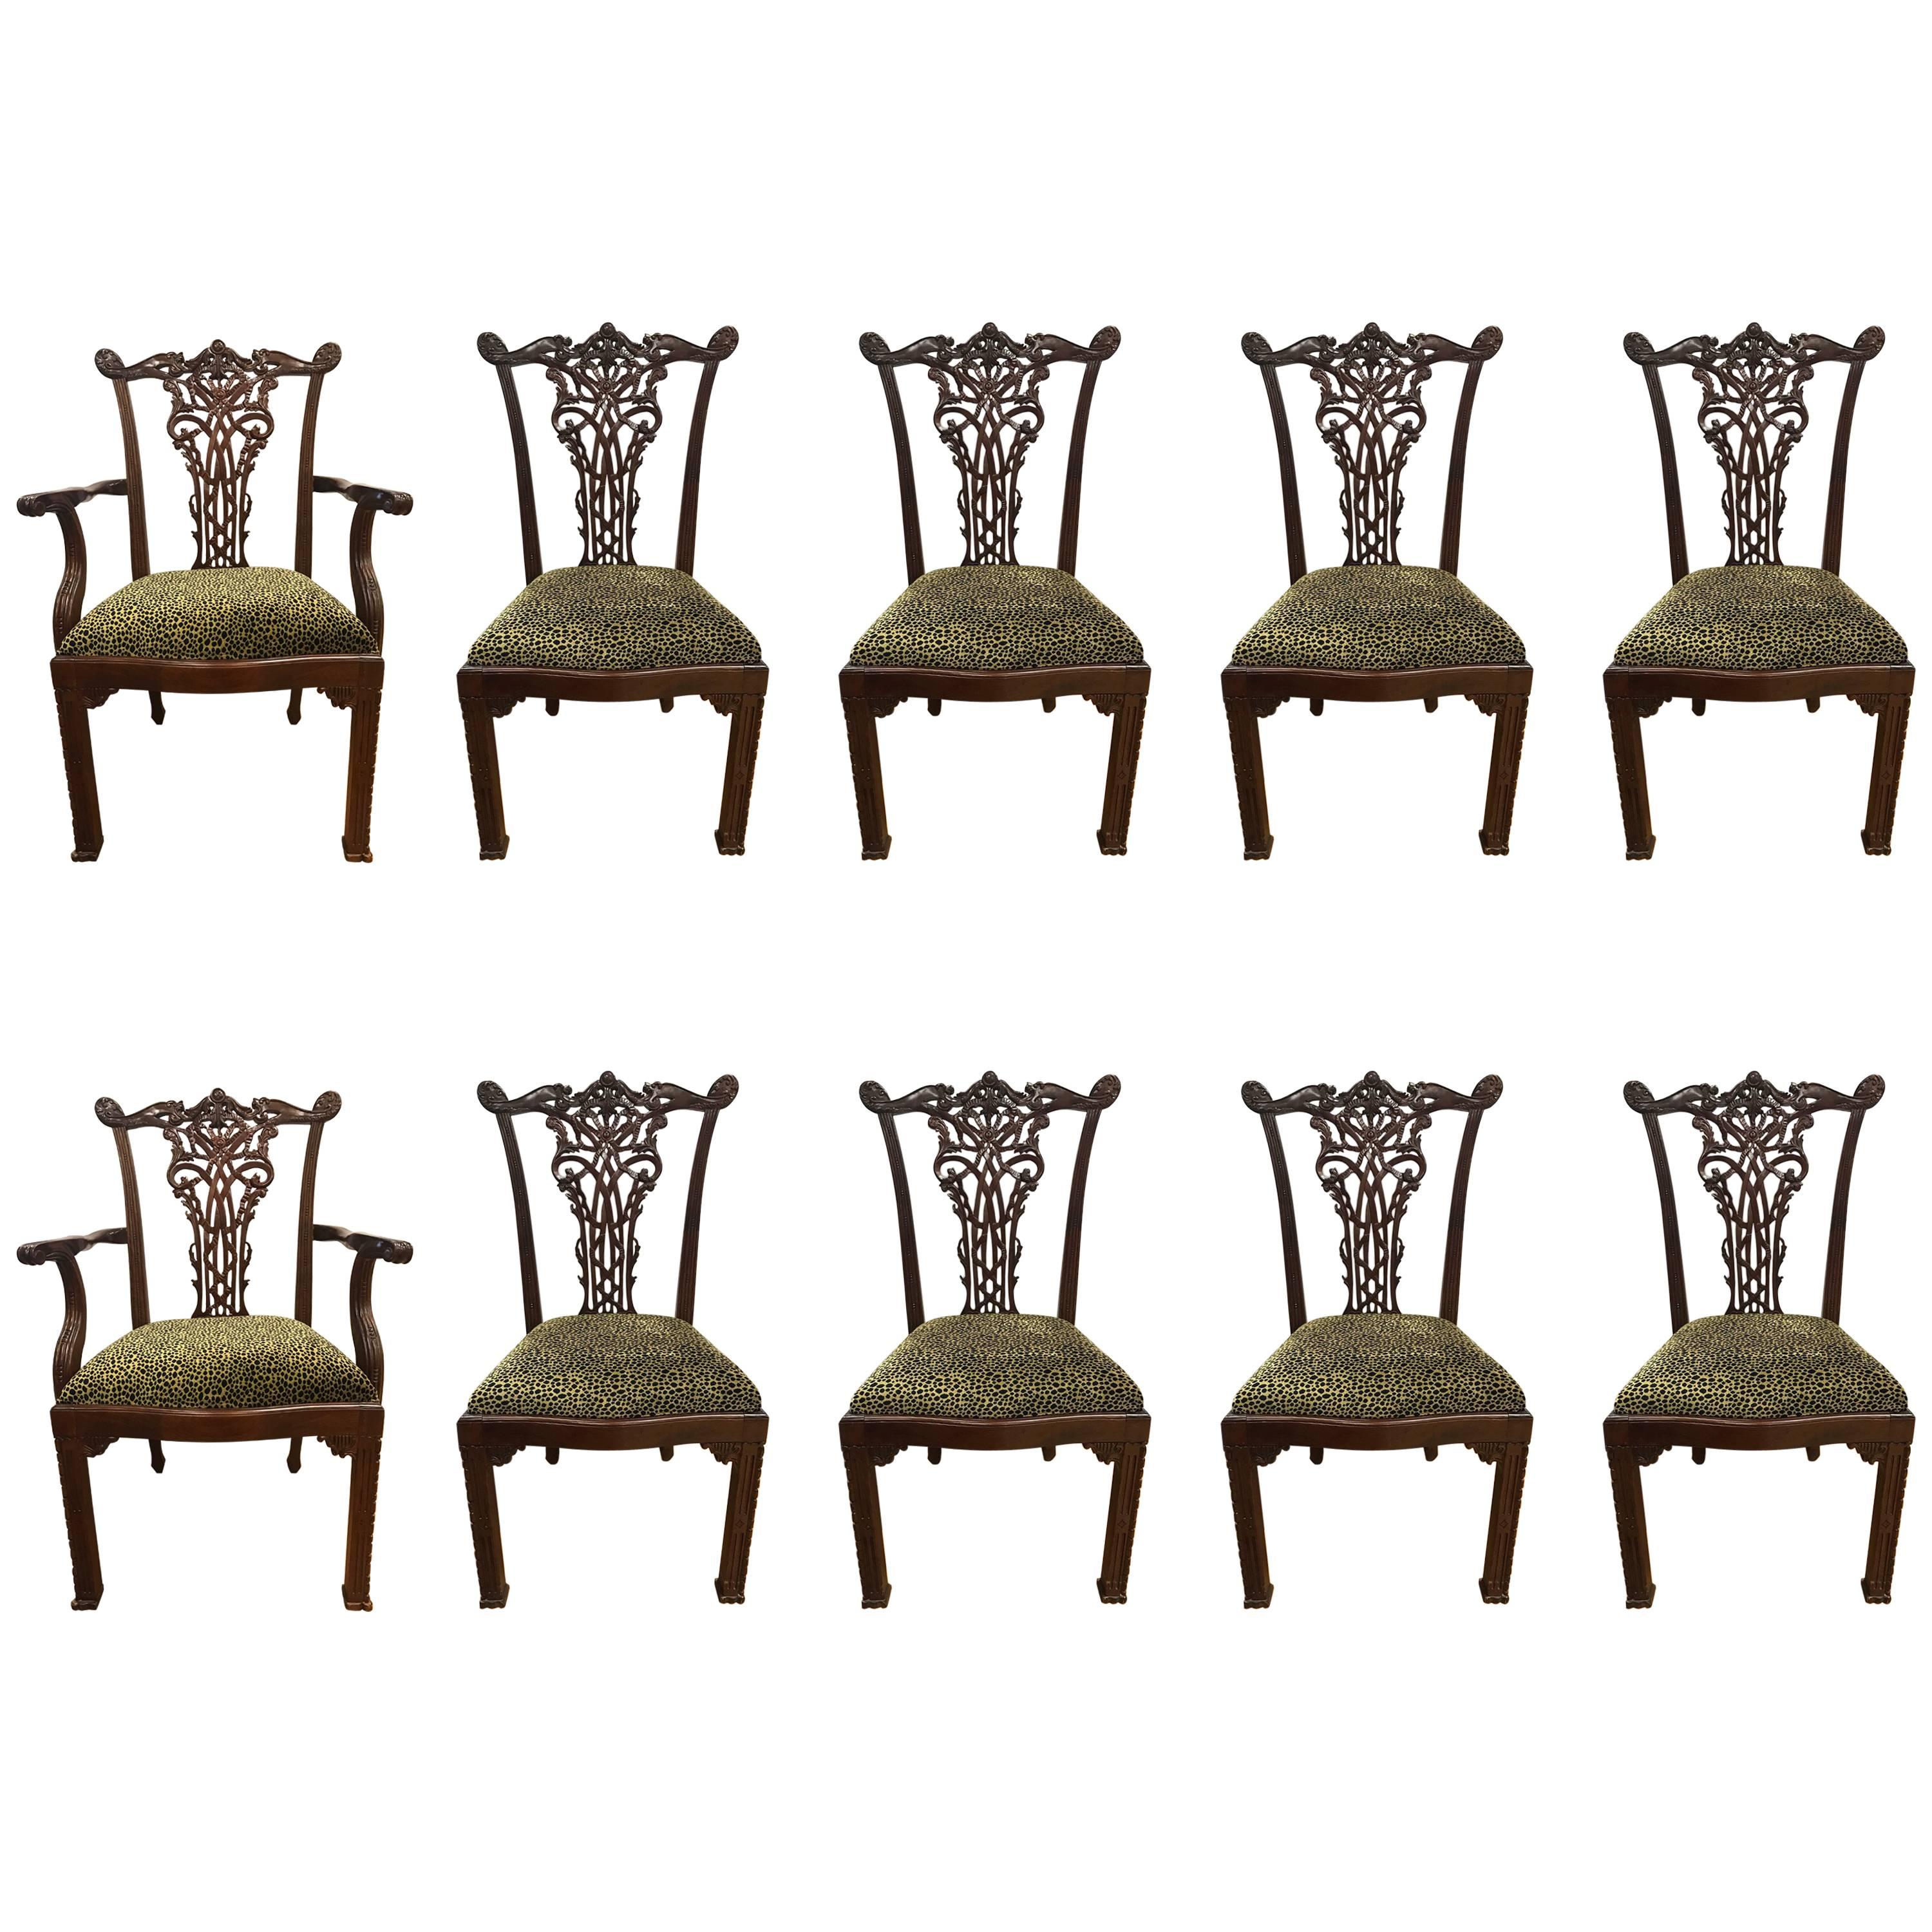 Set of Ten 19th Century Mahogany Carved Chippendale Dining Chairs England